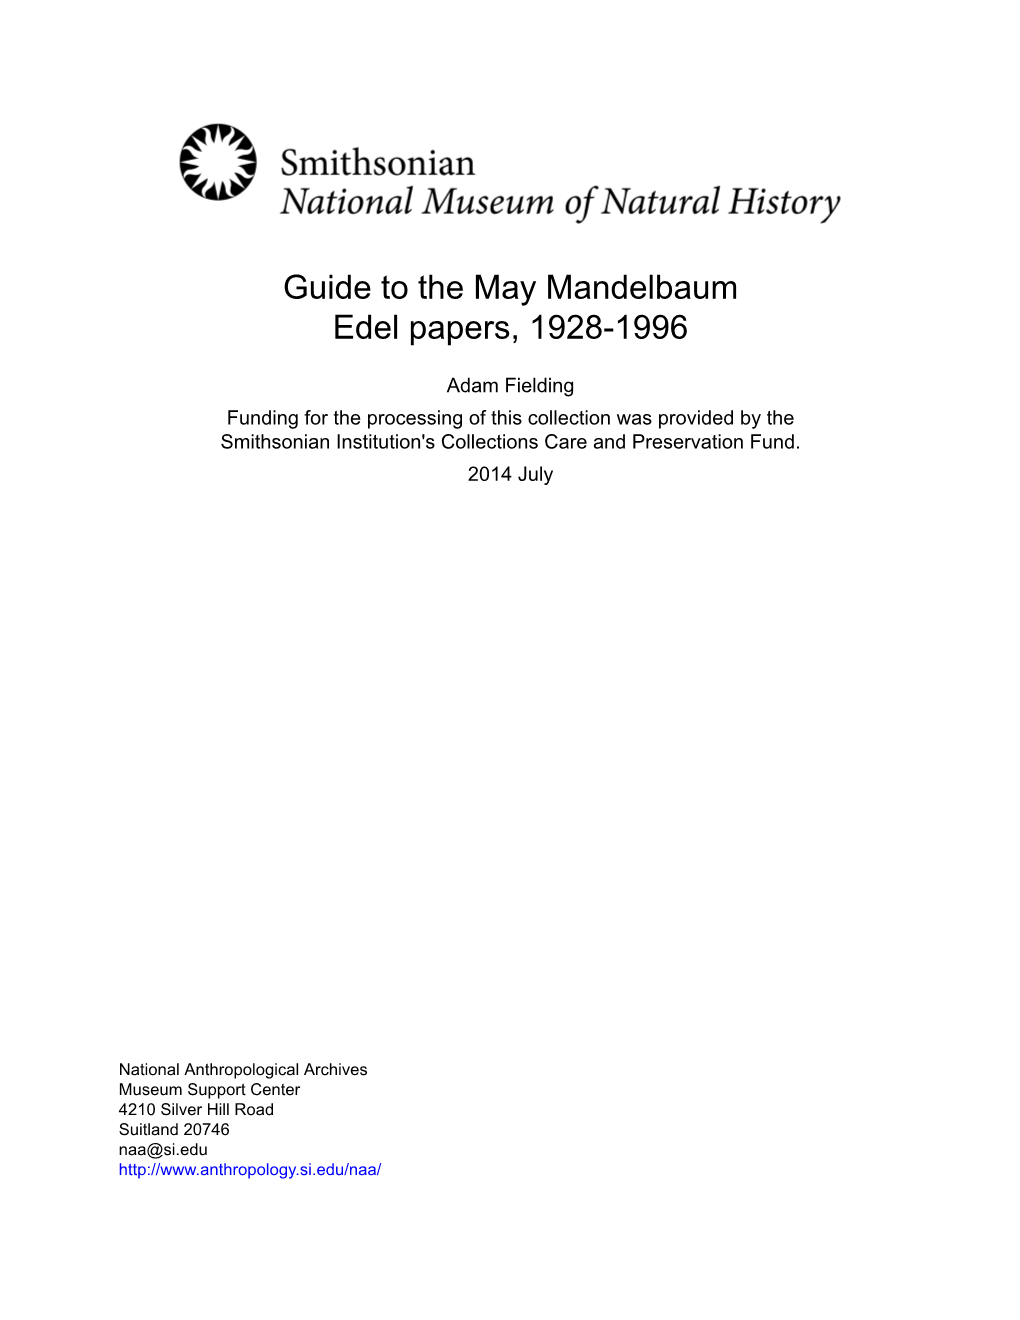 Guide to the May Mandelbaum Edel Papers, 1928-1996